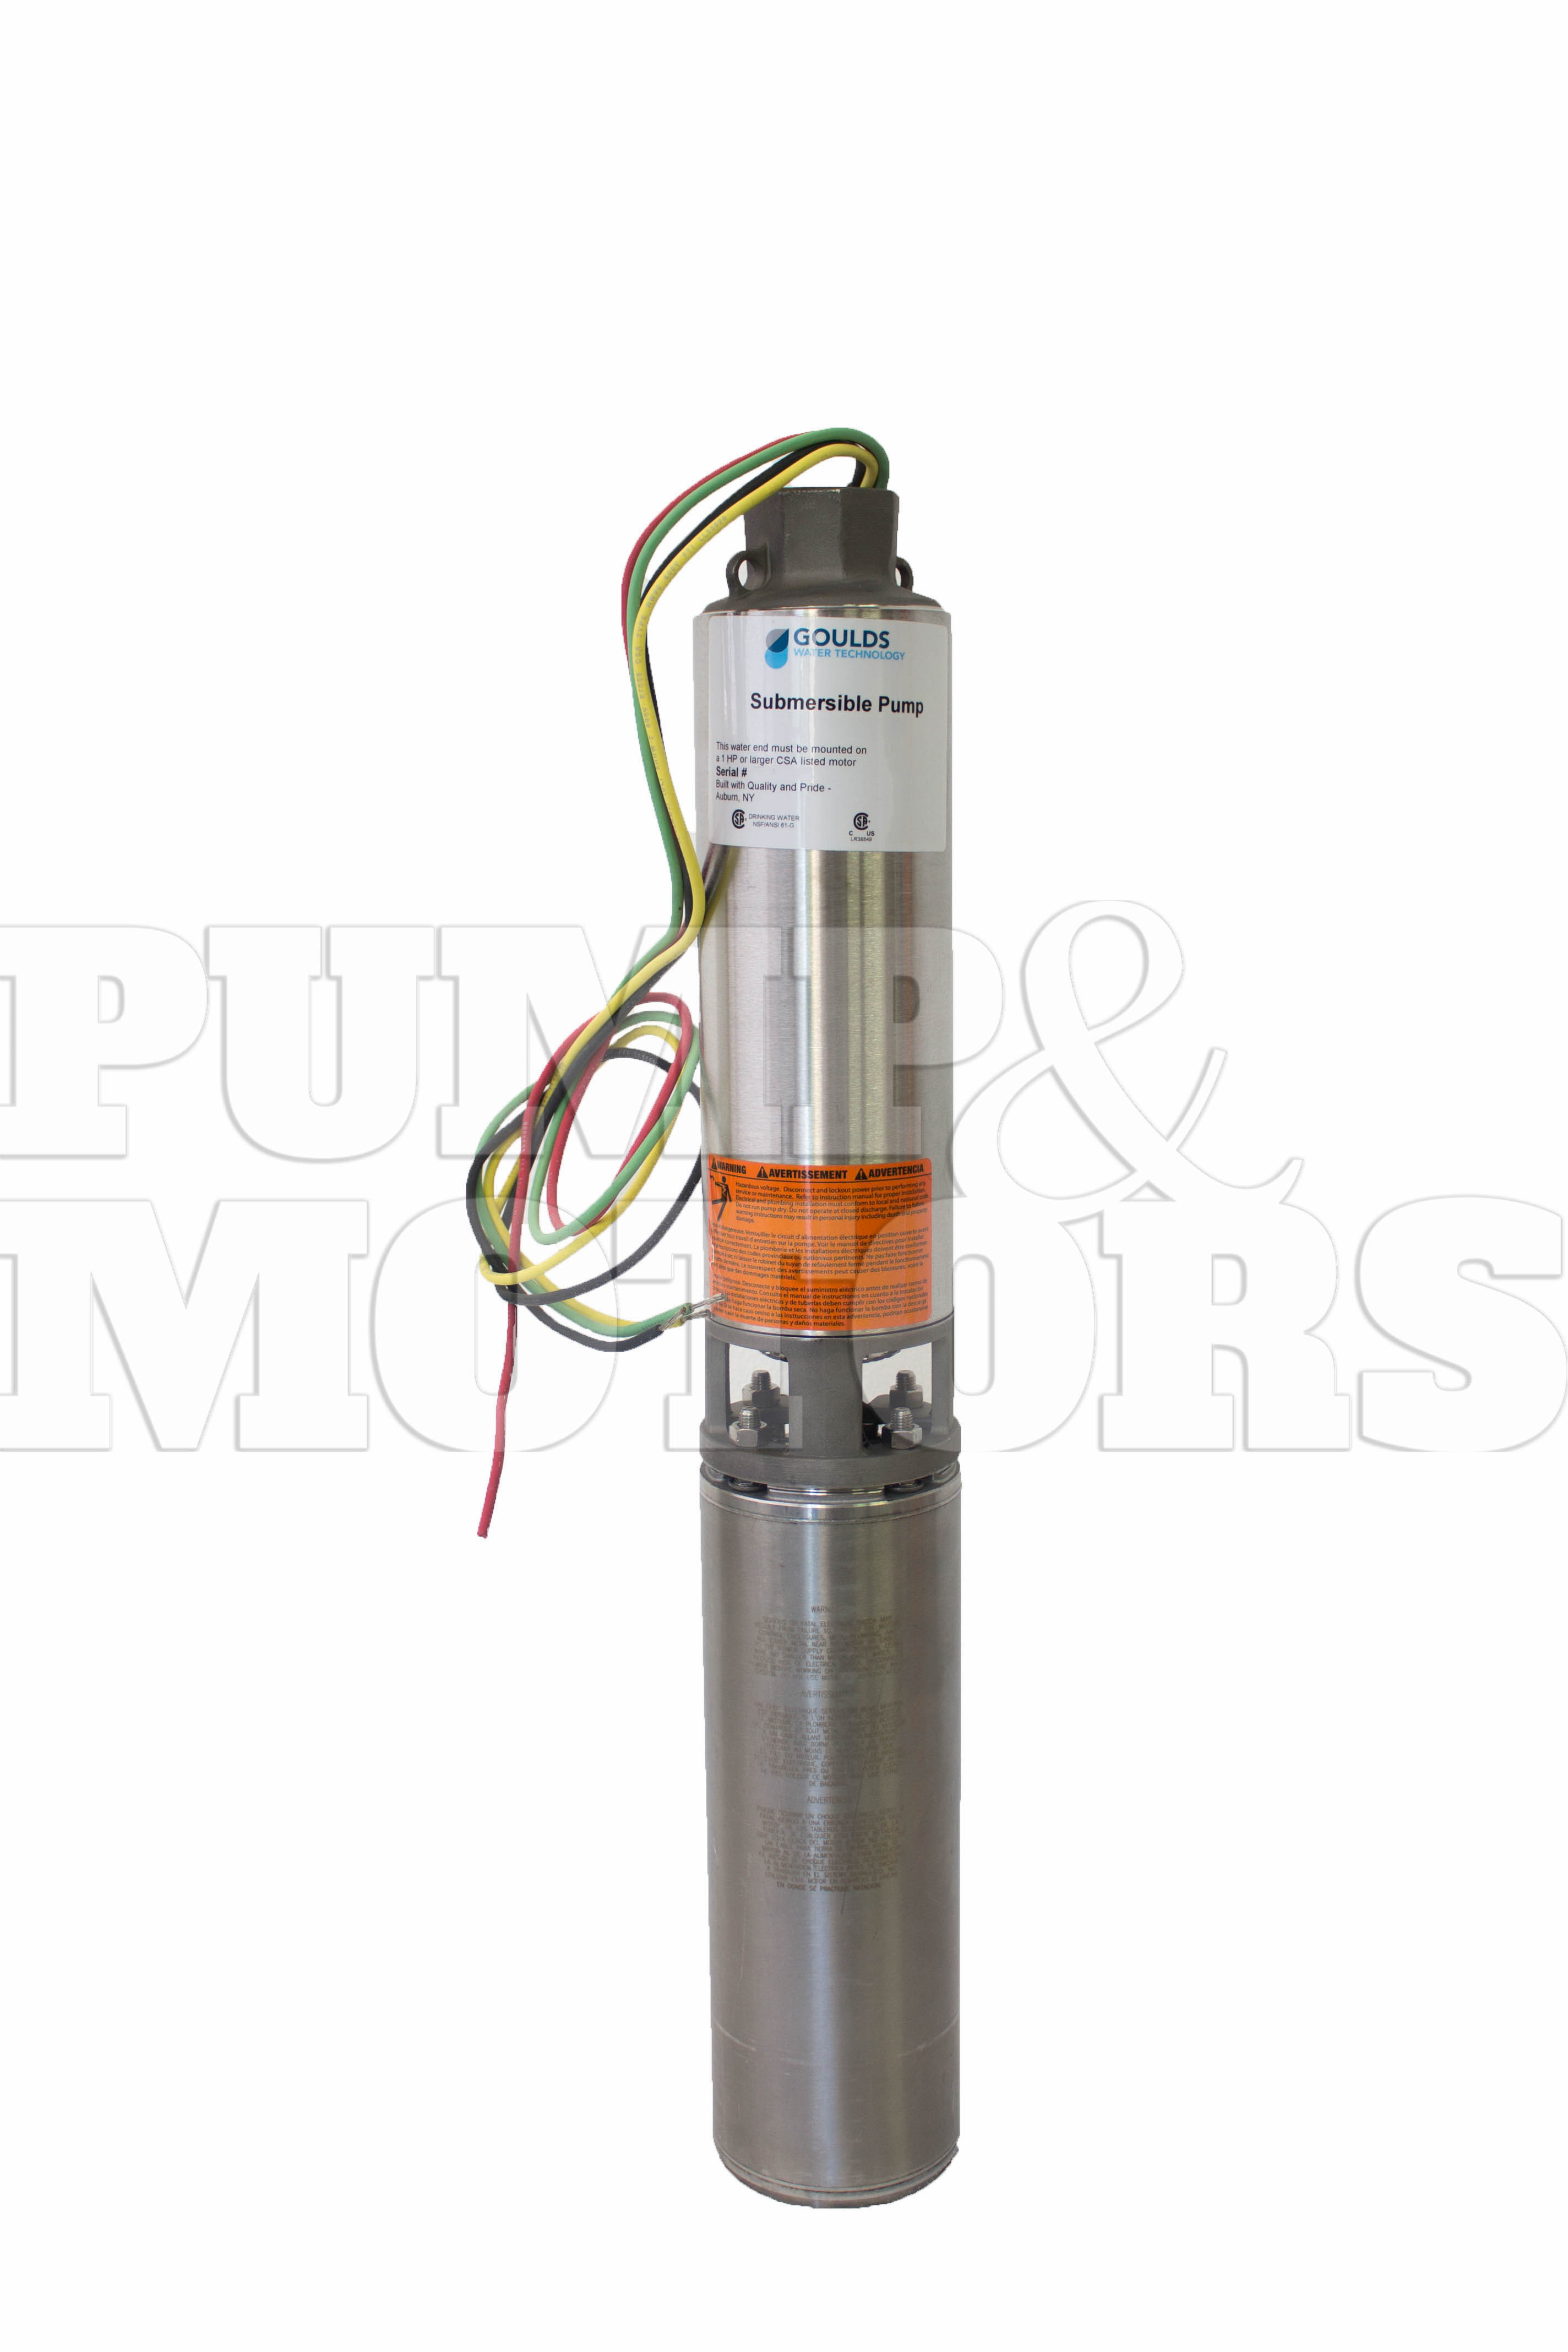 45GS20412CL Goulds 45GPM Submersible Water Well Pump 2HP